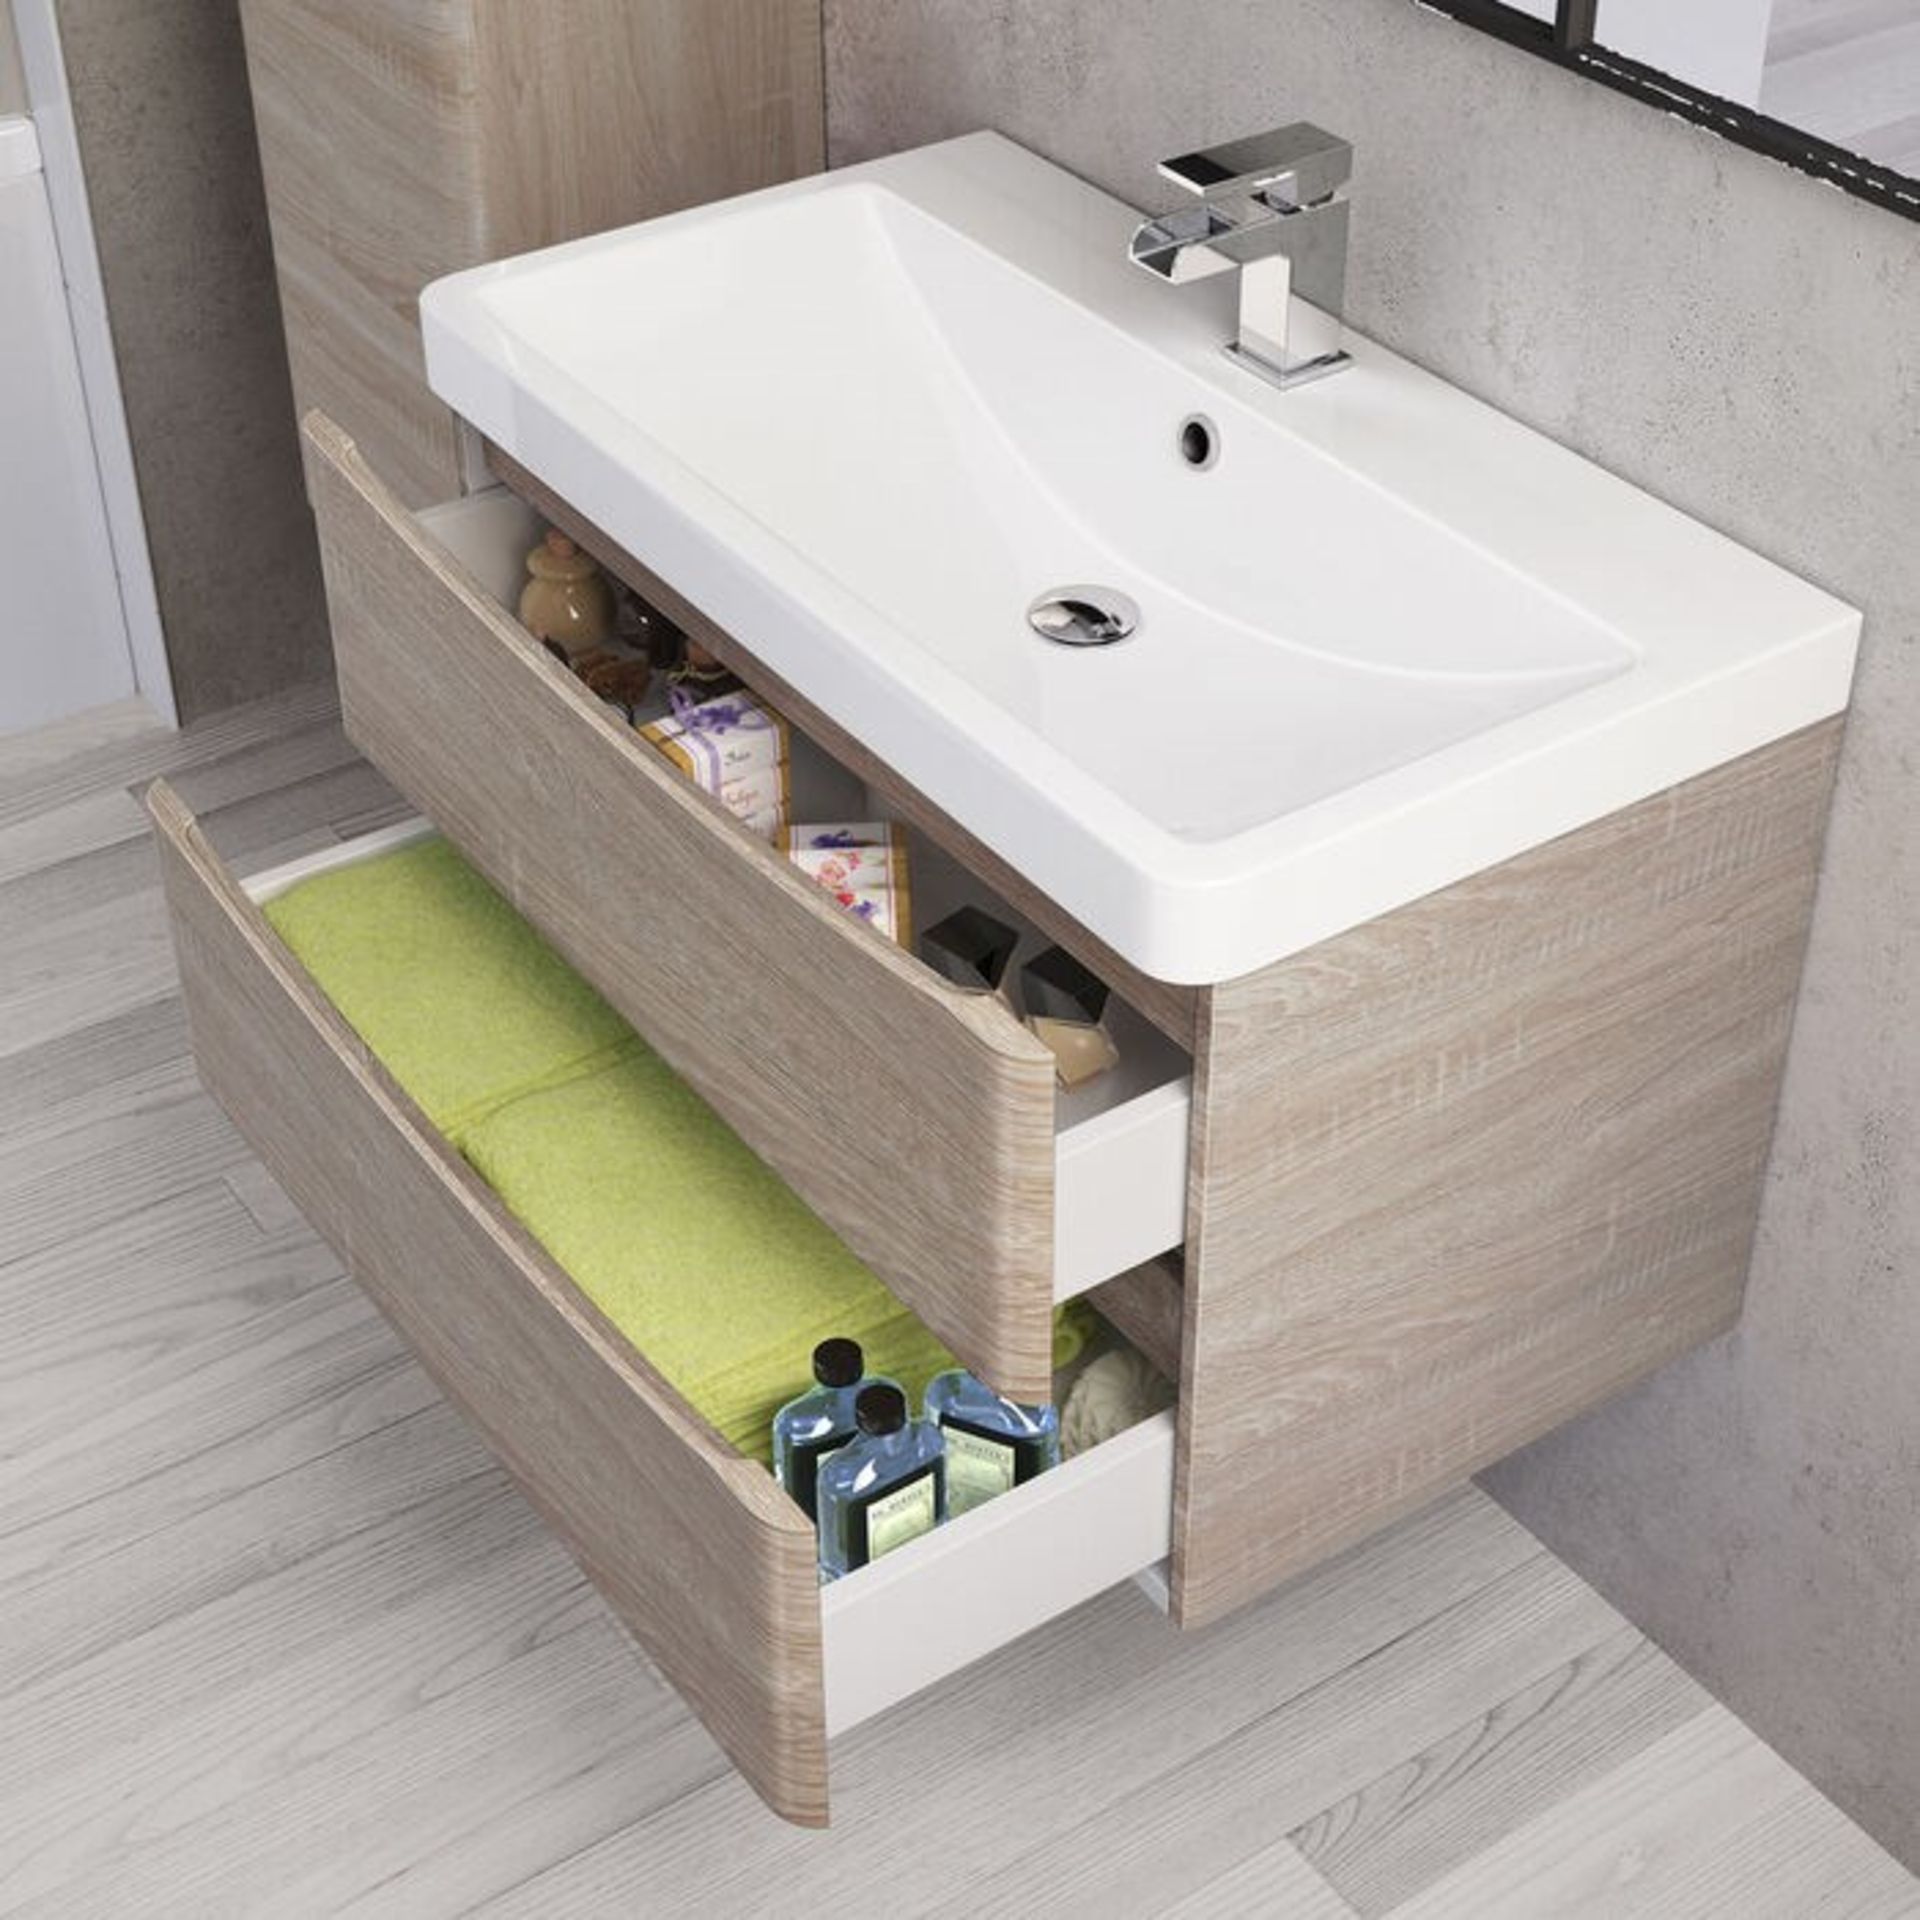 NEW & BOXED 800mm Austin II Light Oak Effect Built In Sink Drawer Unit - Wall Hung. RRP £849.9... - Image 2 of 3